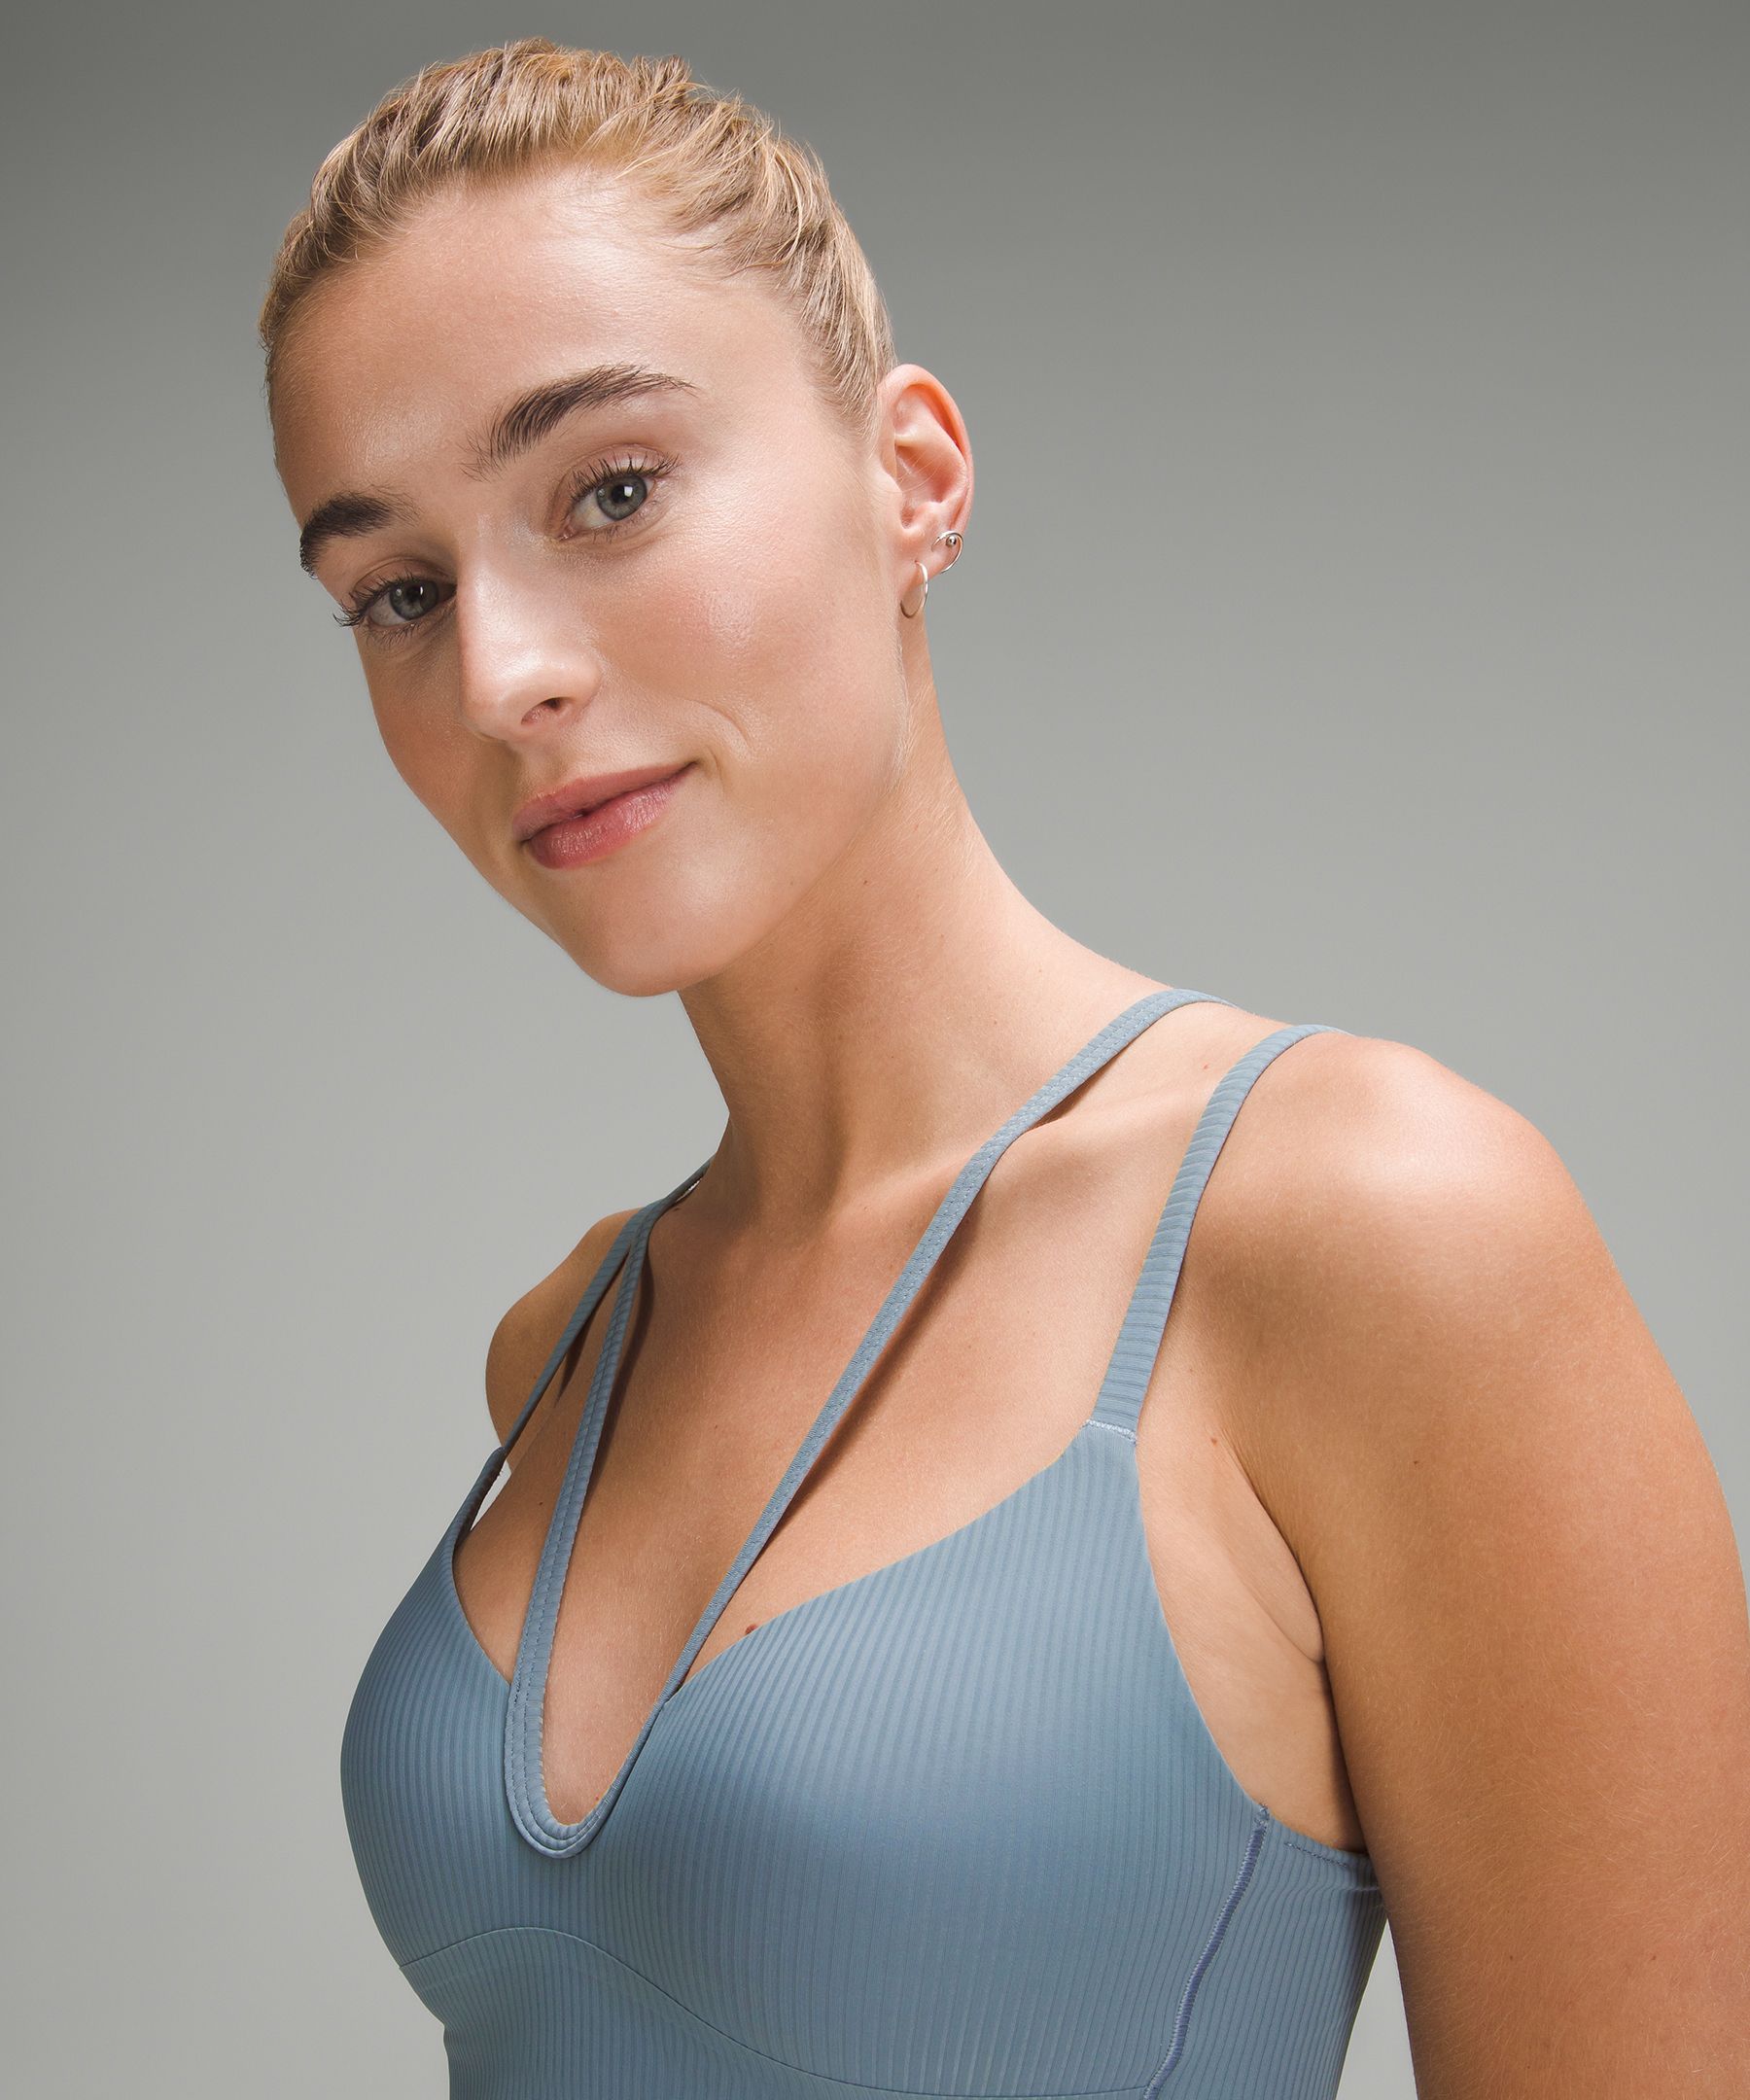 Like a Cloud Strappy Longline Ribbed Bra *Light Support, B/C Cup